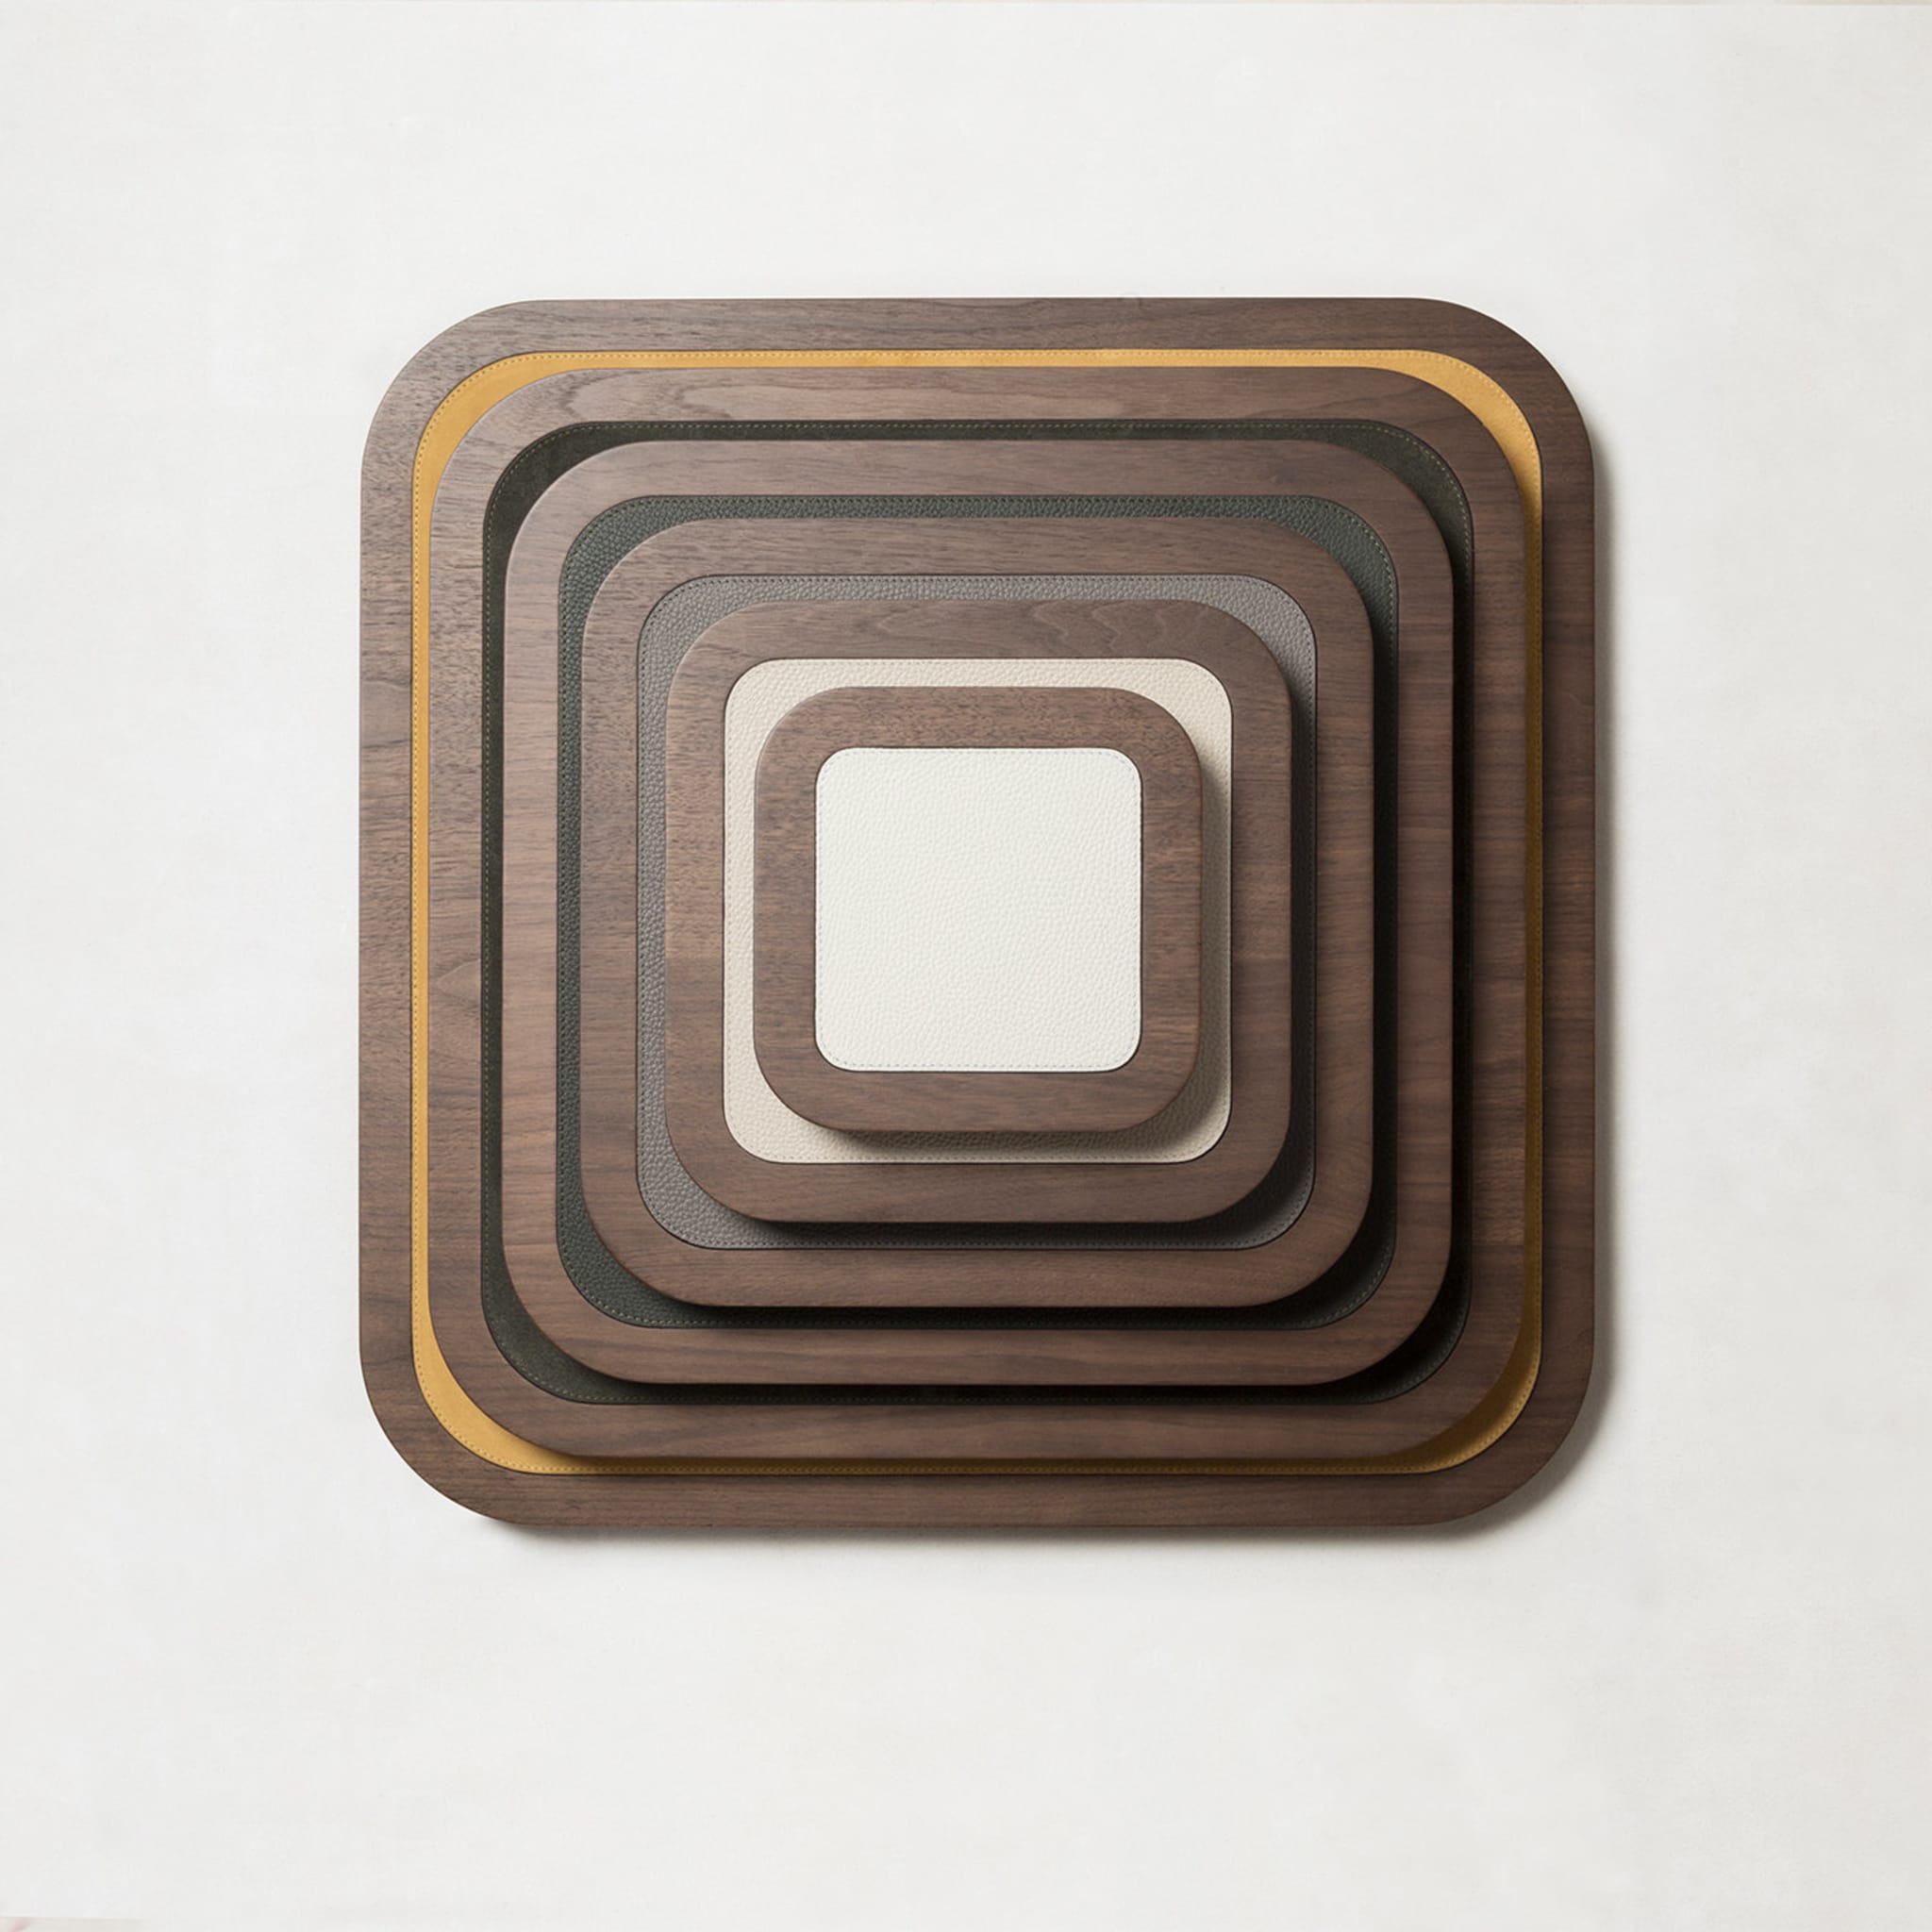 Lloyd Square Tray N. 3 in Taupe and Walnut - Alternative view 3